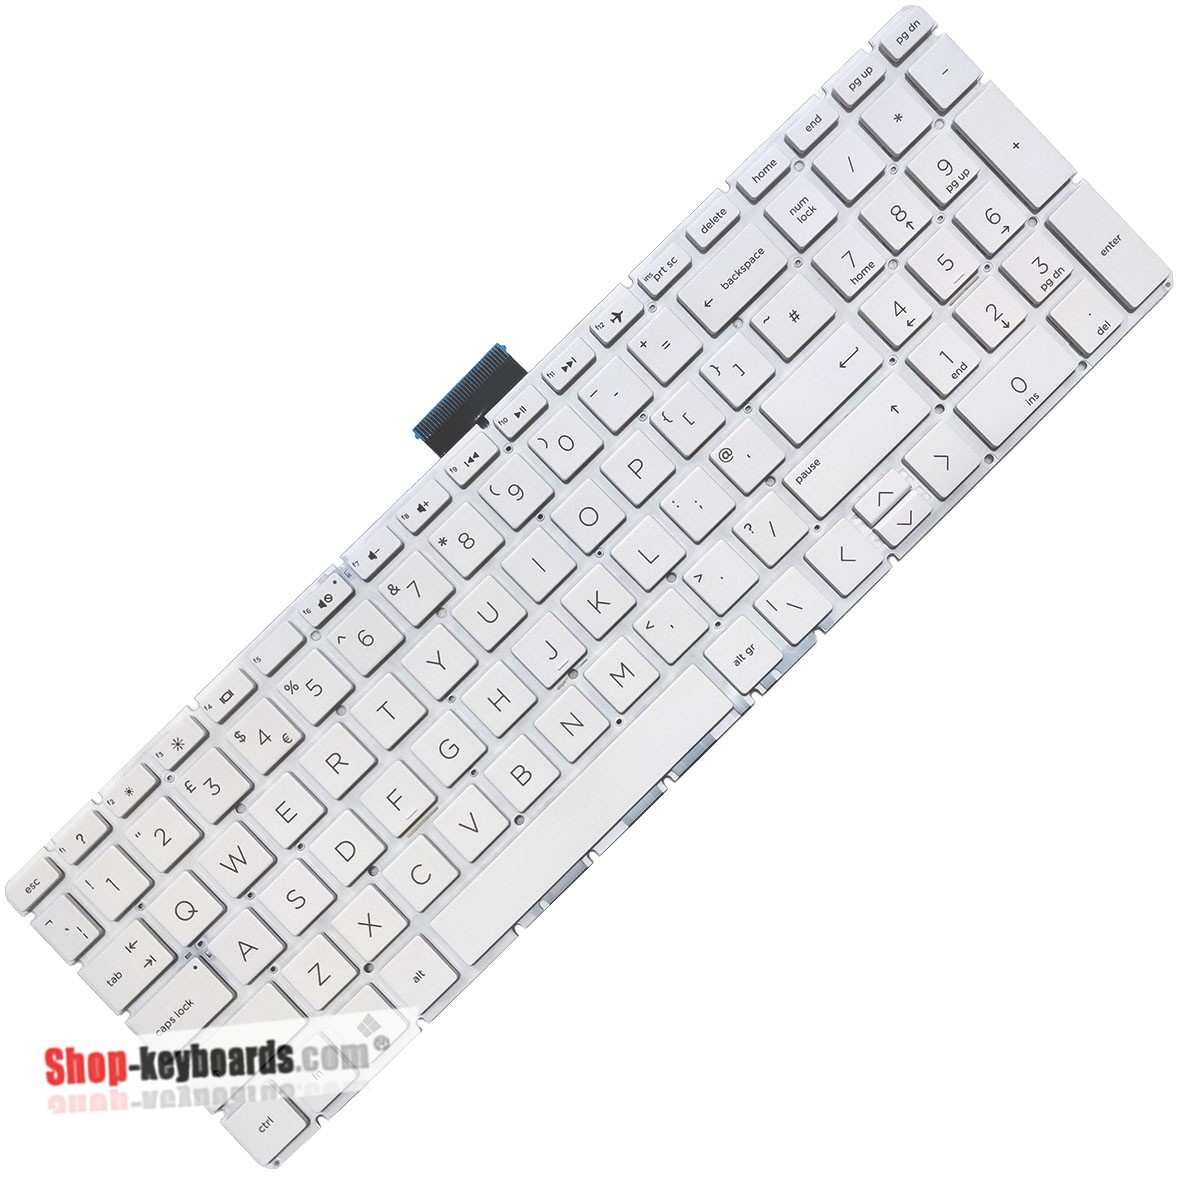 HP PAVILION X360 15-BR010UR  Keyboard replacement